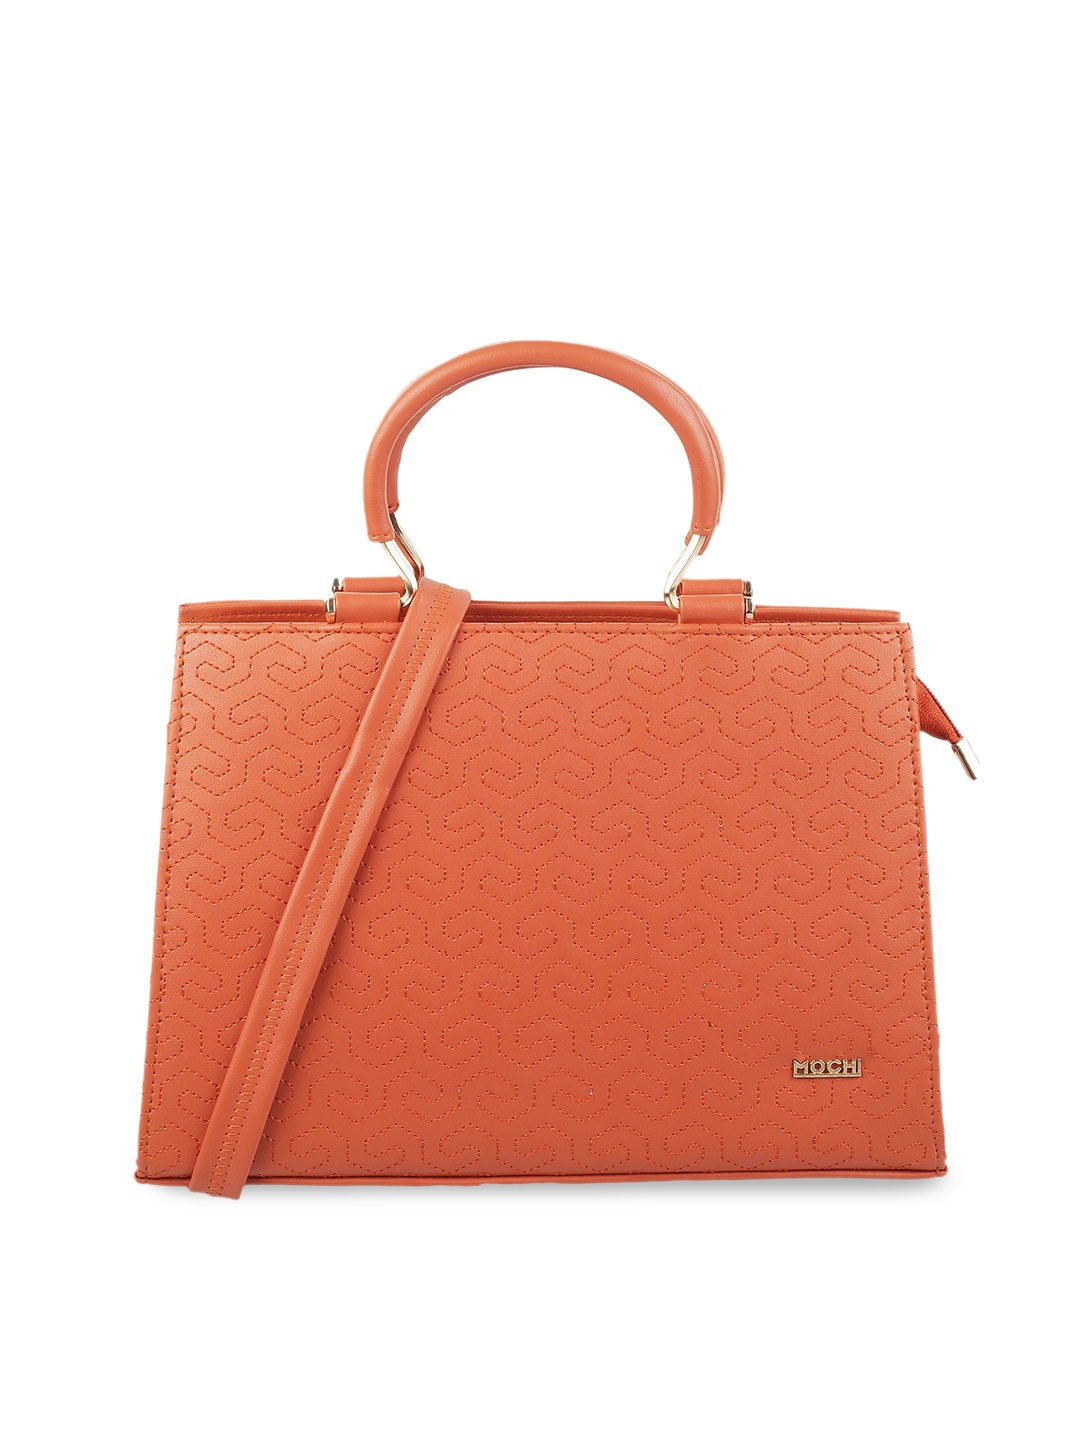 Mochi Orange Textured Structured Handheld Bag with Quilted Price in India